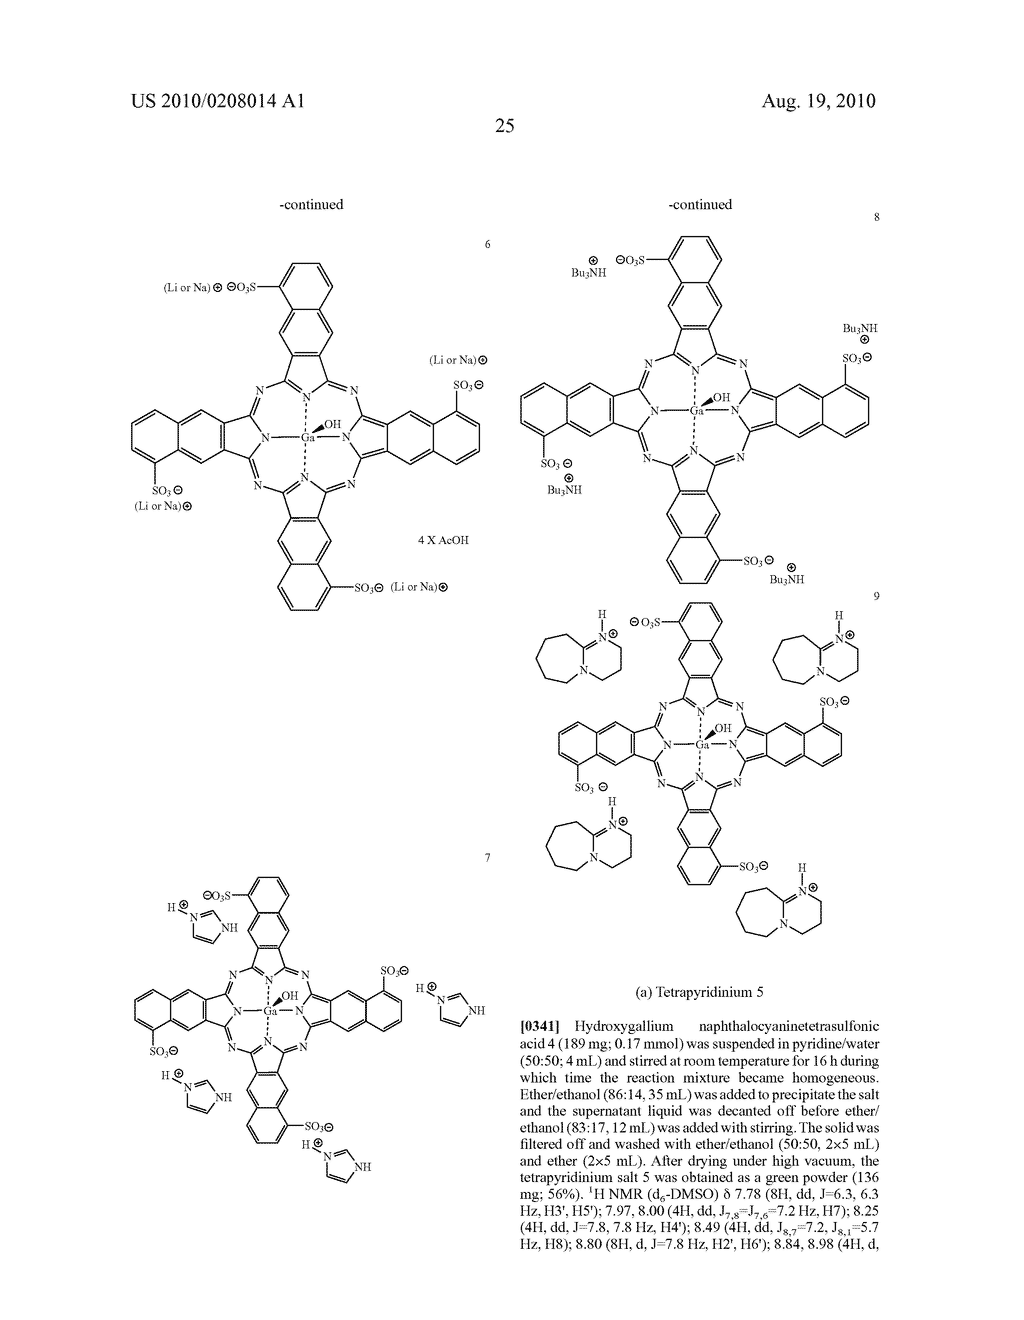 INK CARTRIDGE COMPRISING WEAKLY ACIDIC NAPHTHALOCYANINE INK FORMULATION - diagram, schematic, and image 55